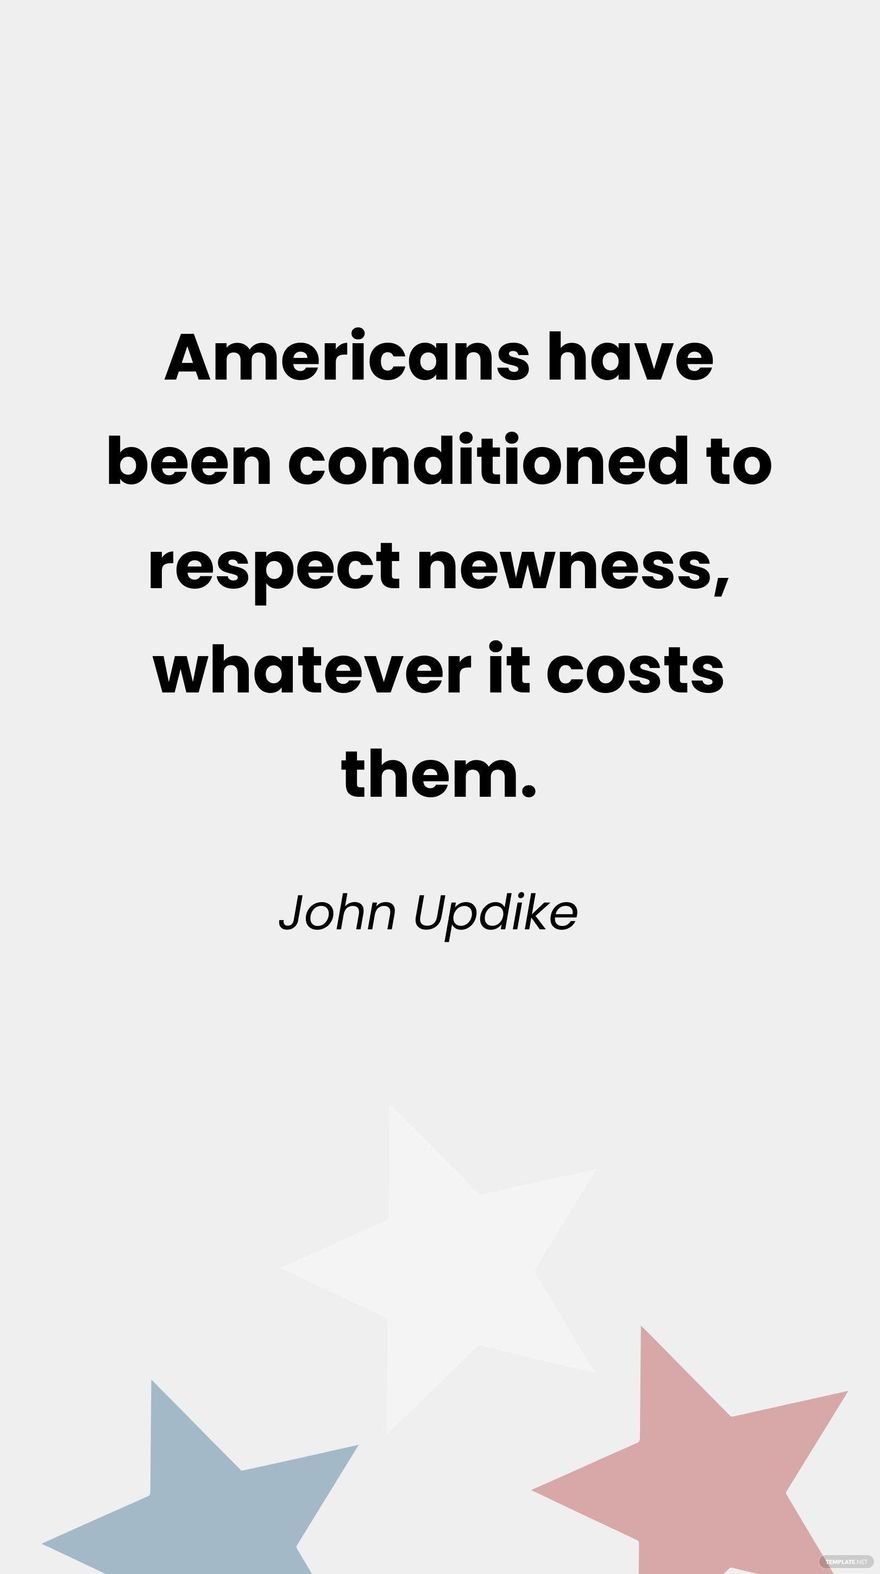 Free John Updike- Americans have been conditioned to respect newness, whatever it costs them. in JPG